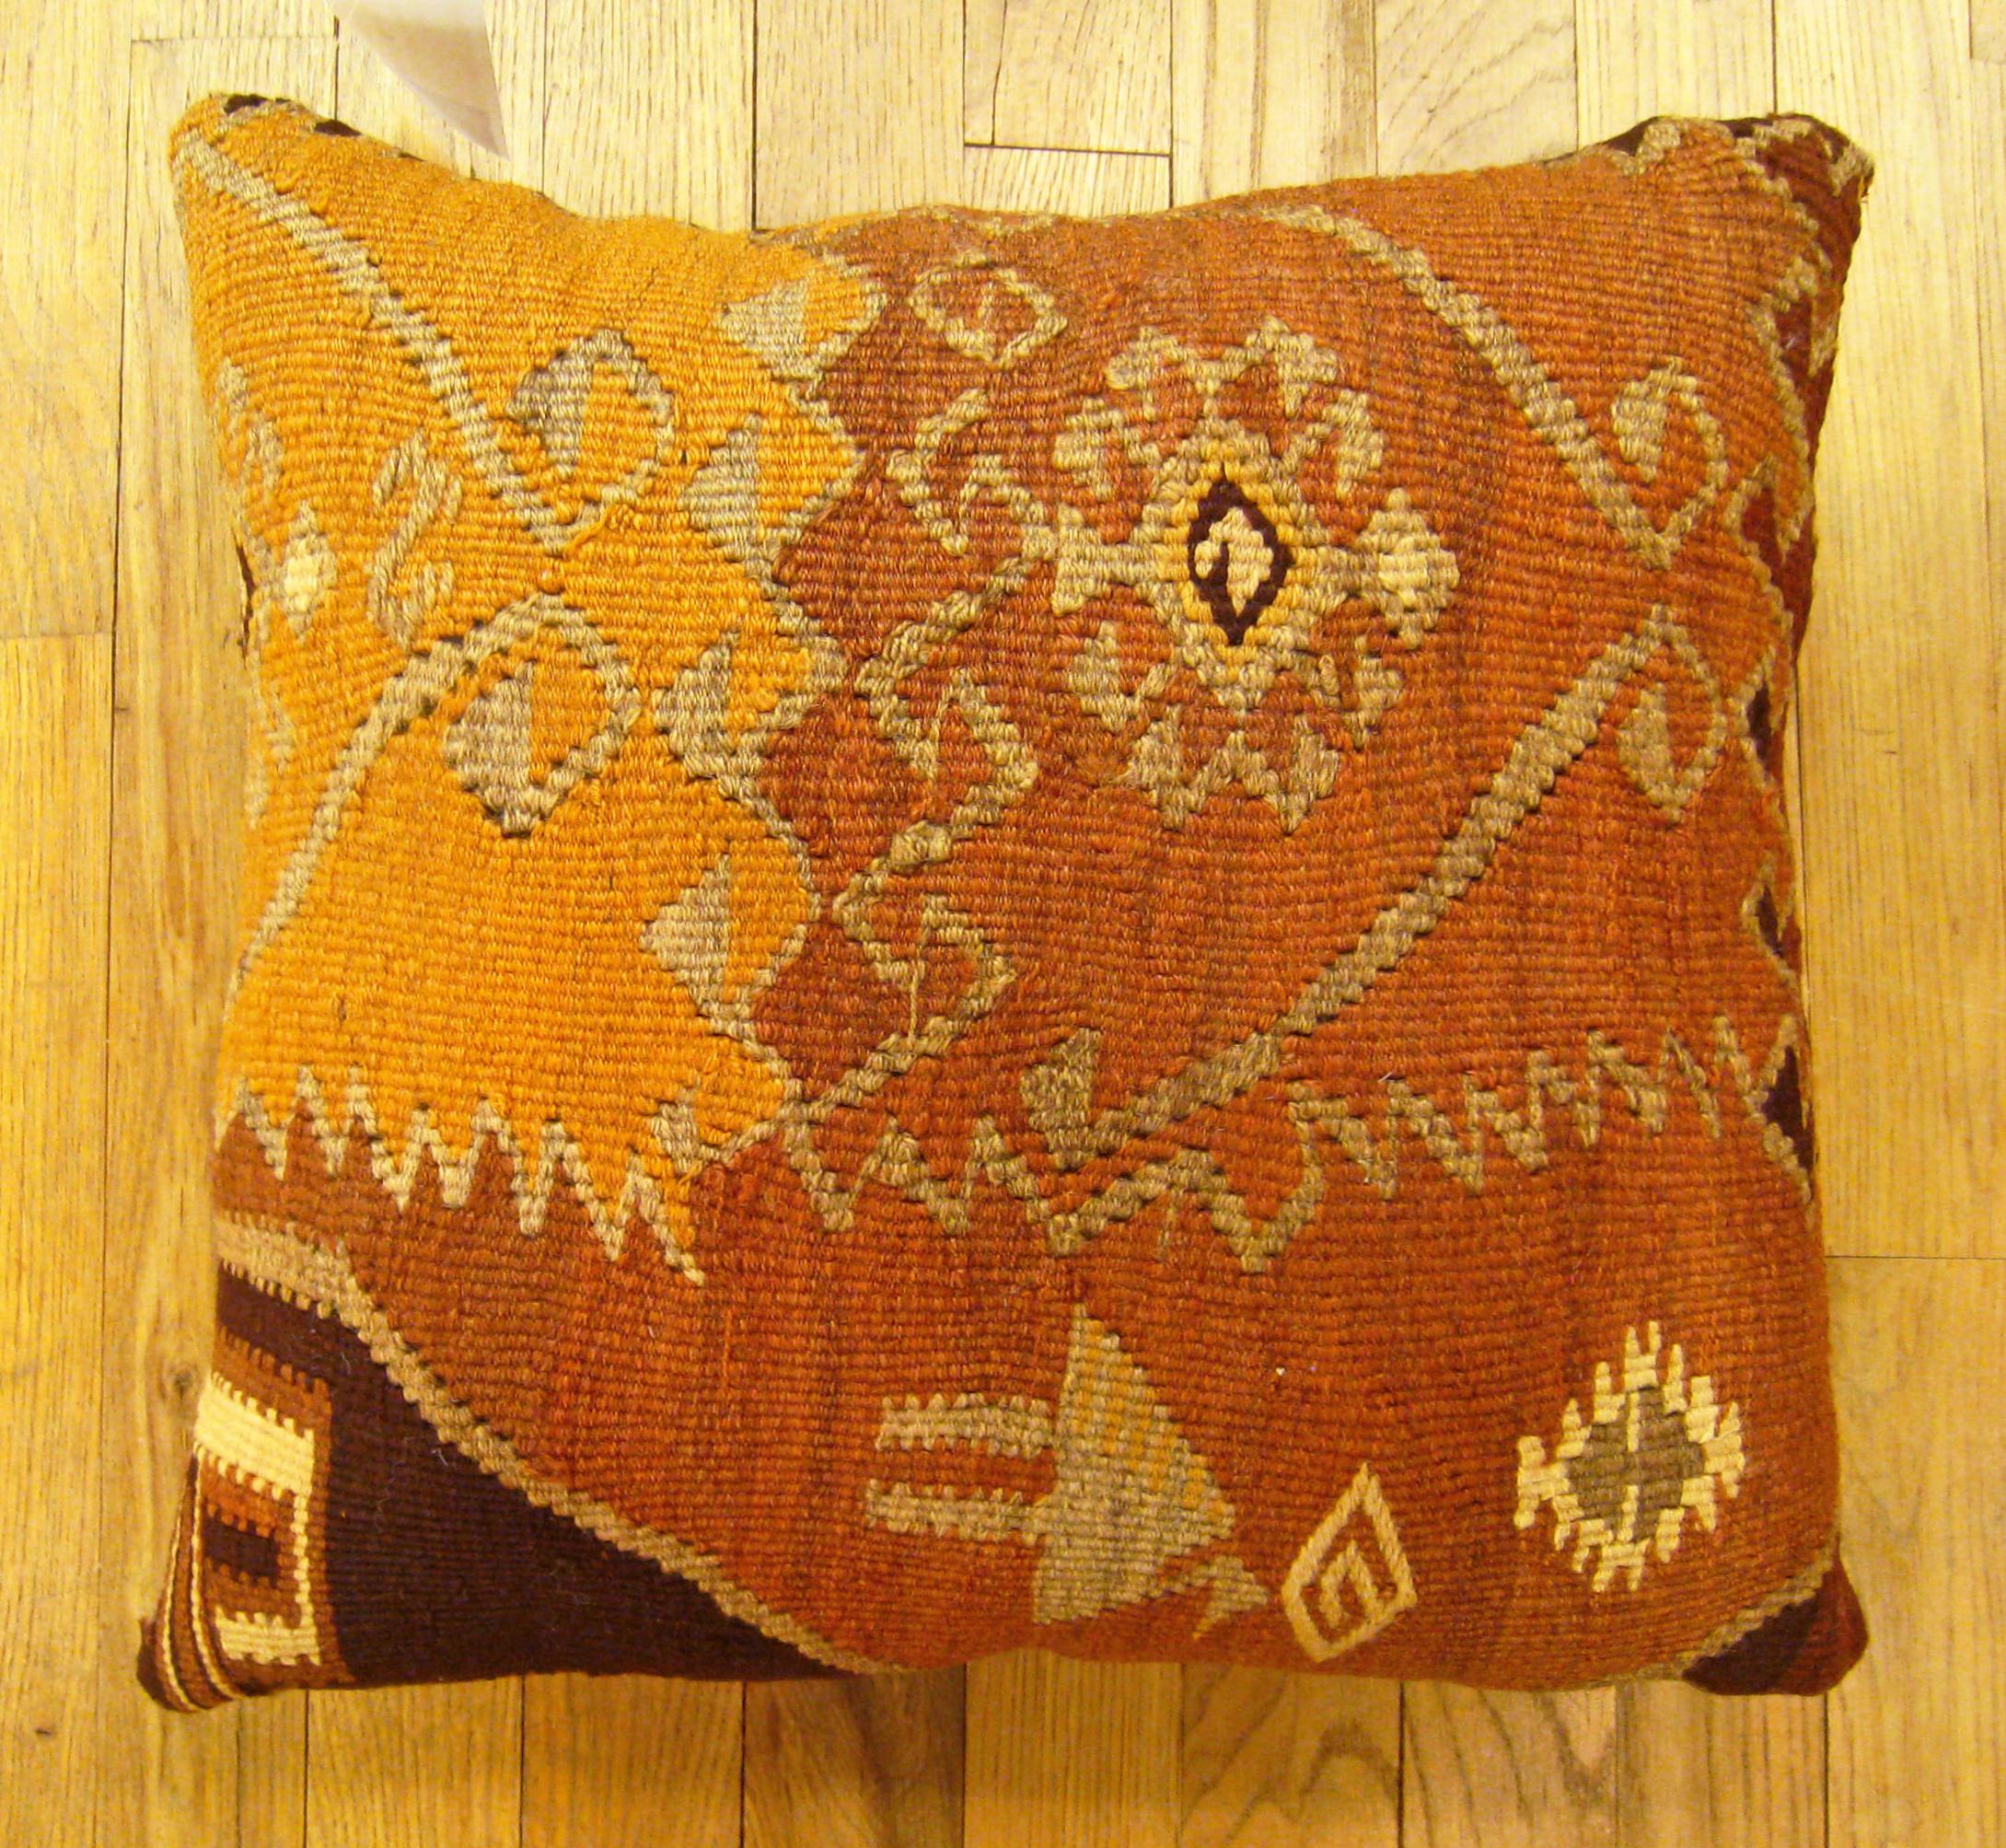 Vintage Turkish Kilim Rug Pillow; size 17” x 17”.

A vintage decorative pillow with geometric abstracts allover a brown central field, size 17” x 17”. This lovely decorative pillow features a vintage fabric of a KIilim carpet on front which is